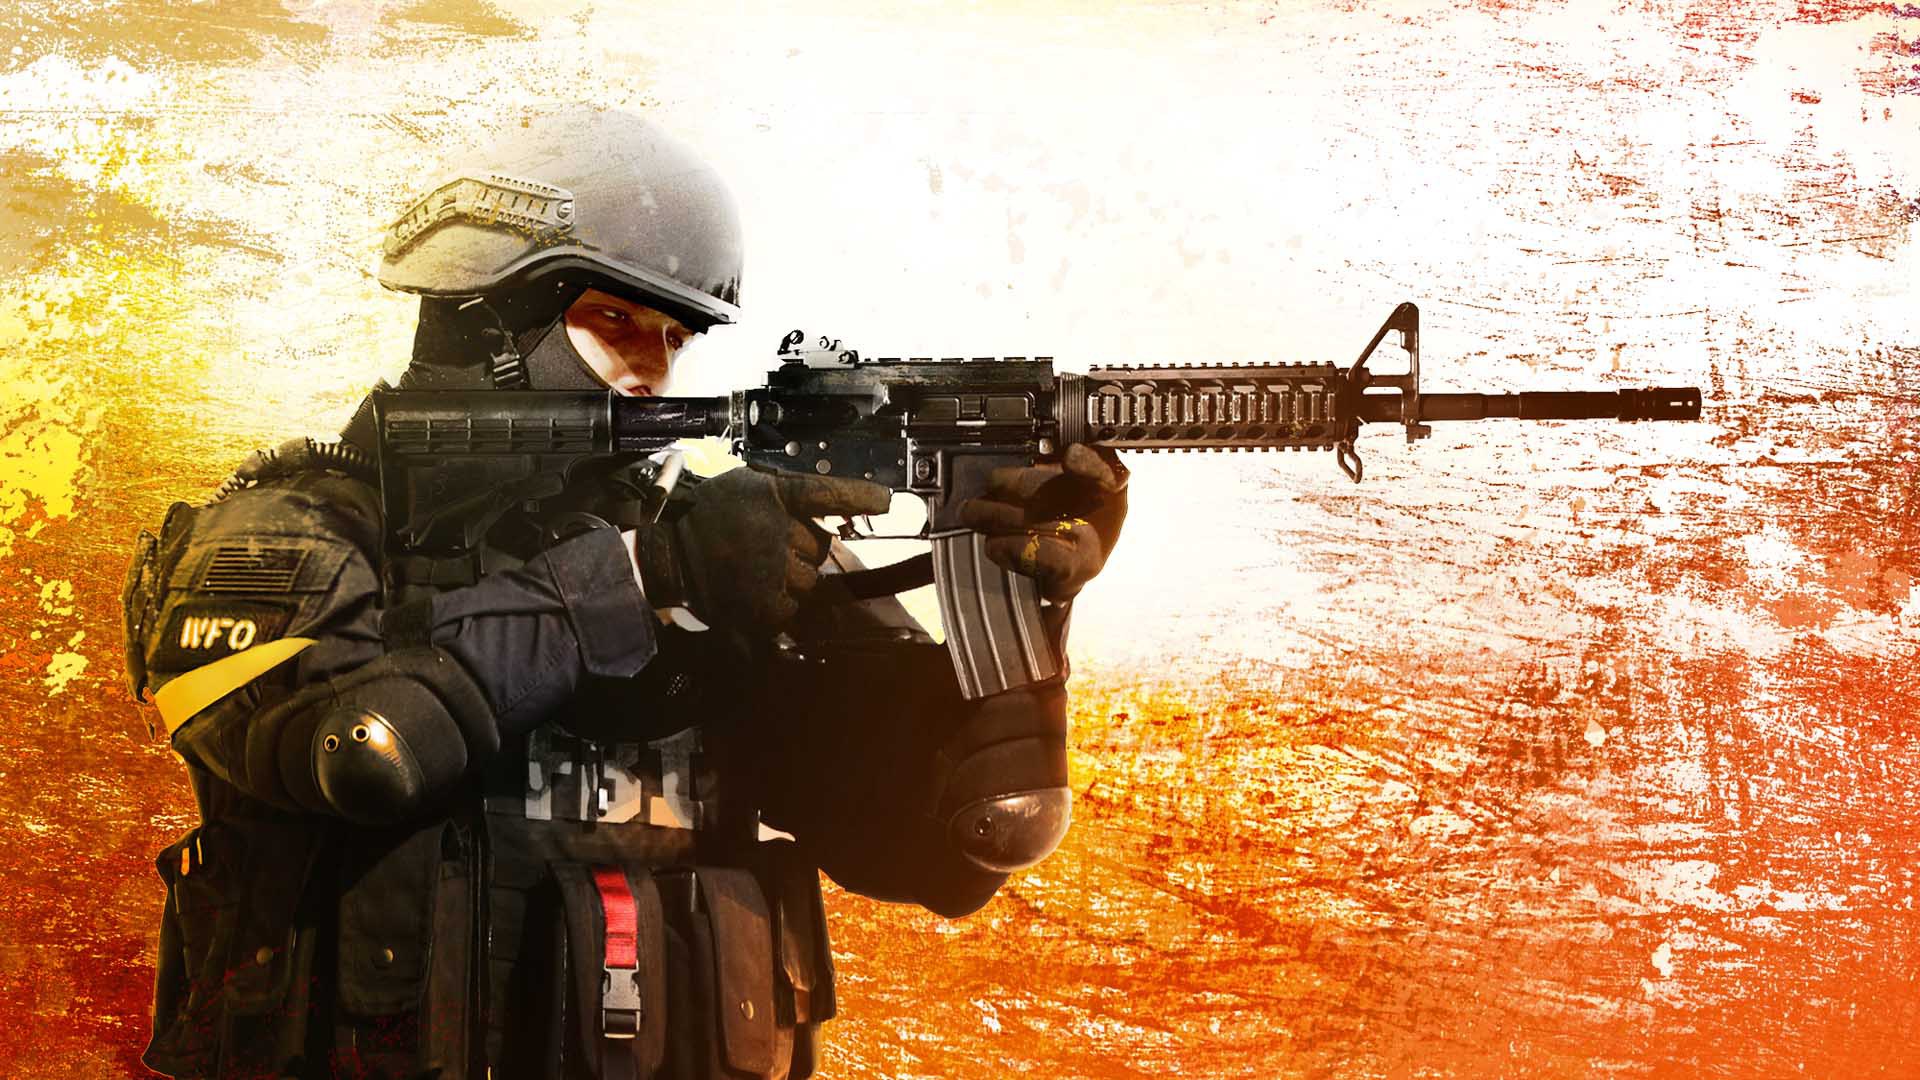 Counter-Strike: Global Offensive Wallpapers Images Photos Pictures